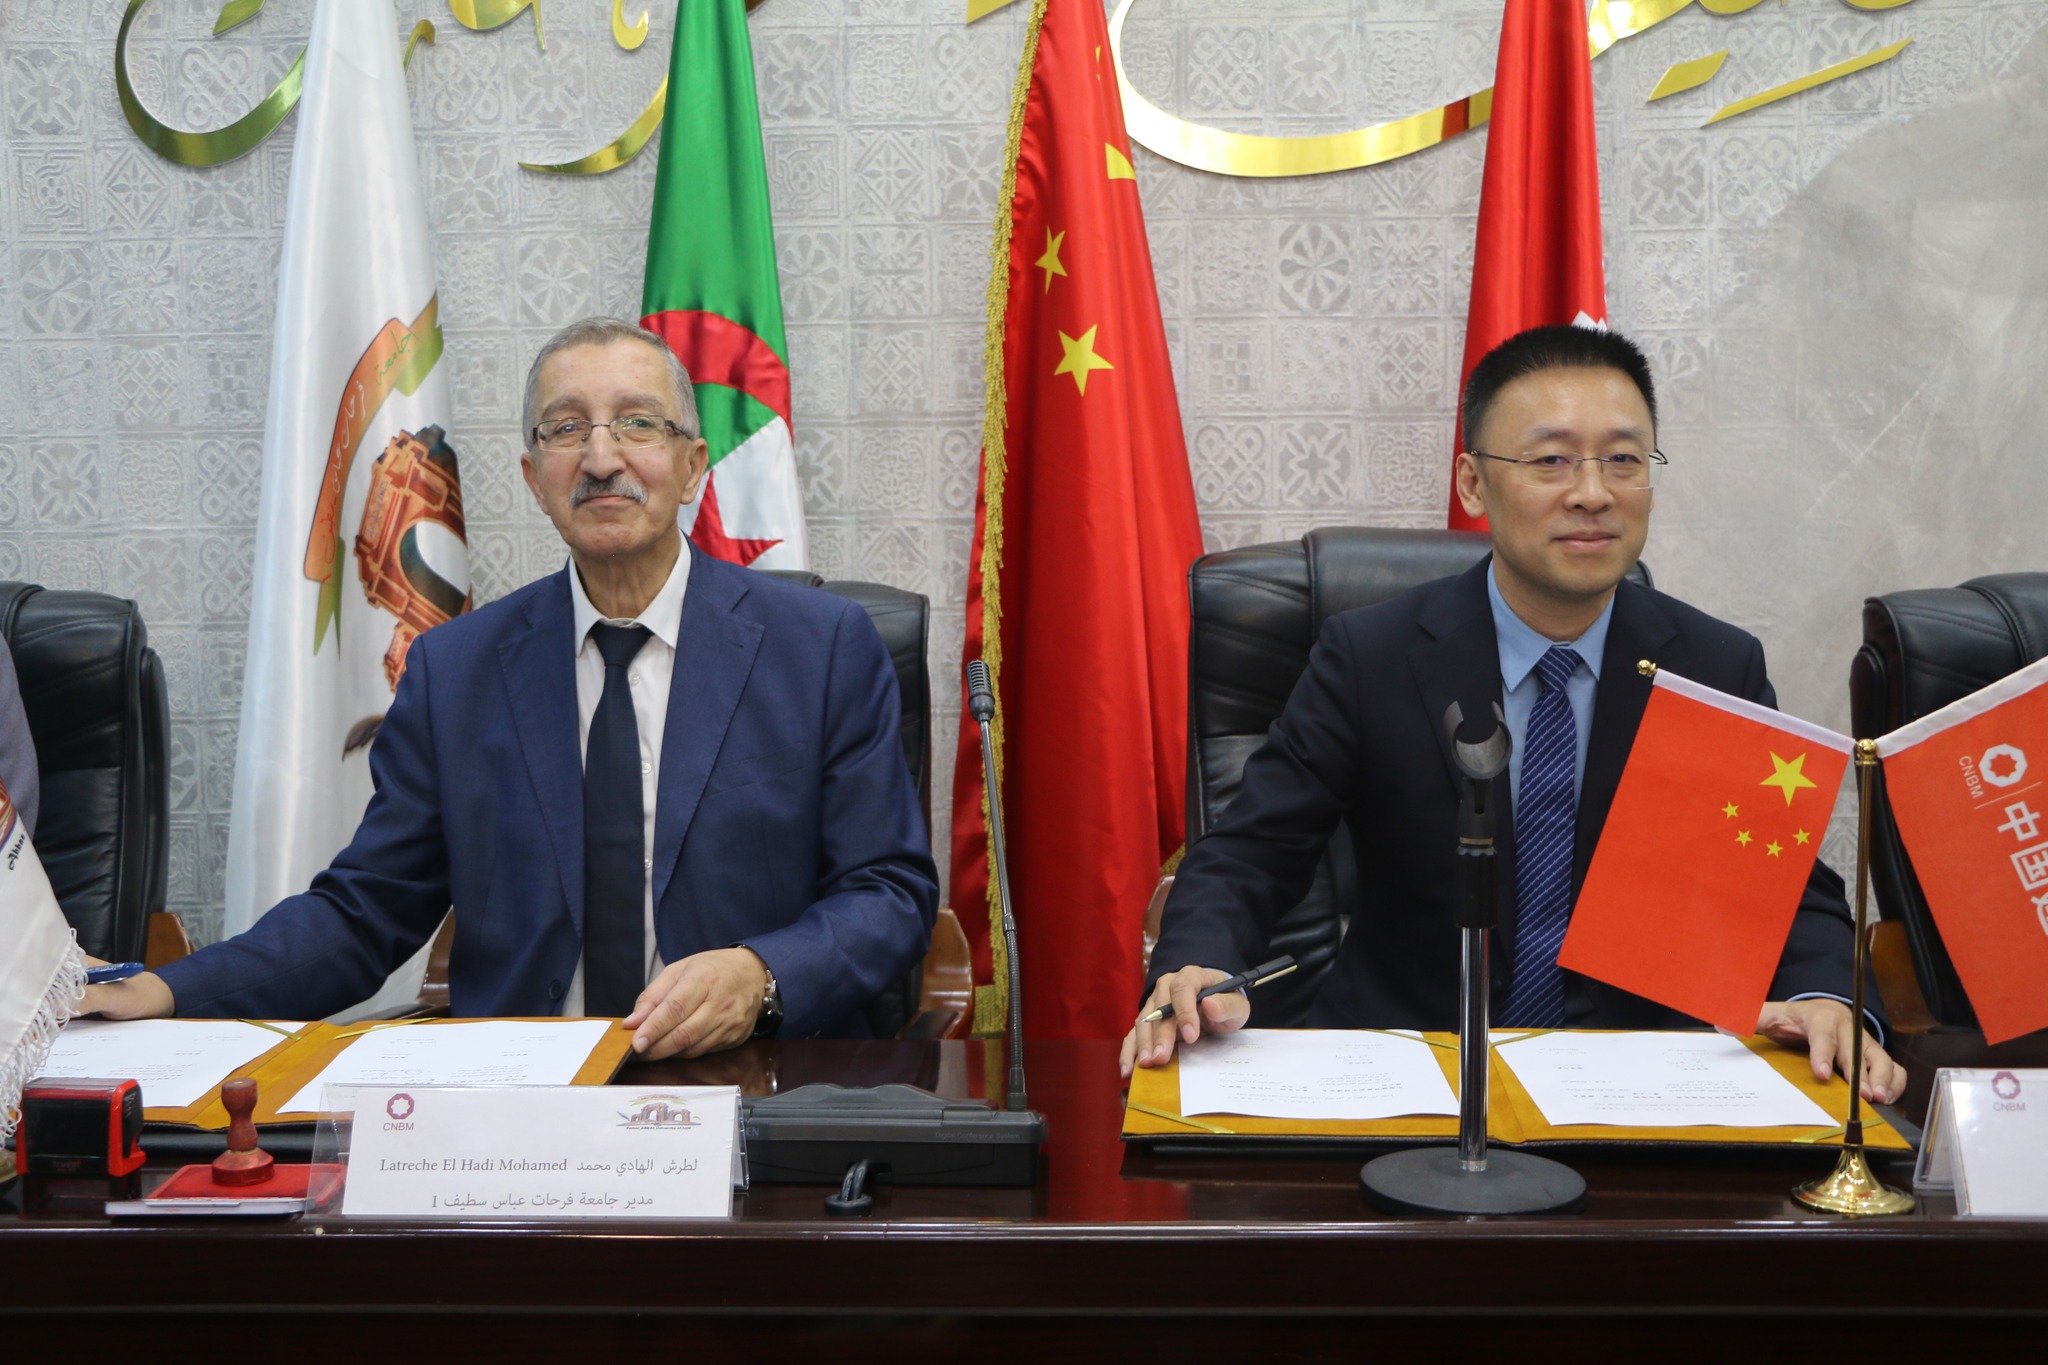 Sino-Algerian partnership: framework agreement for scientific and technological cooperation and exchange UFAS1-CNBM